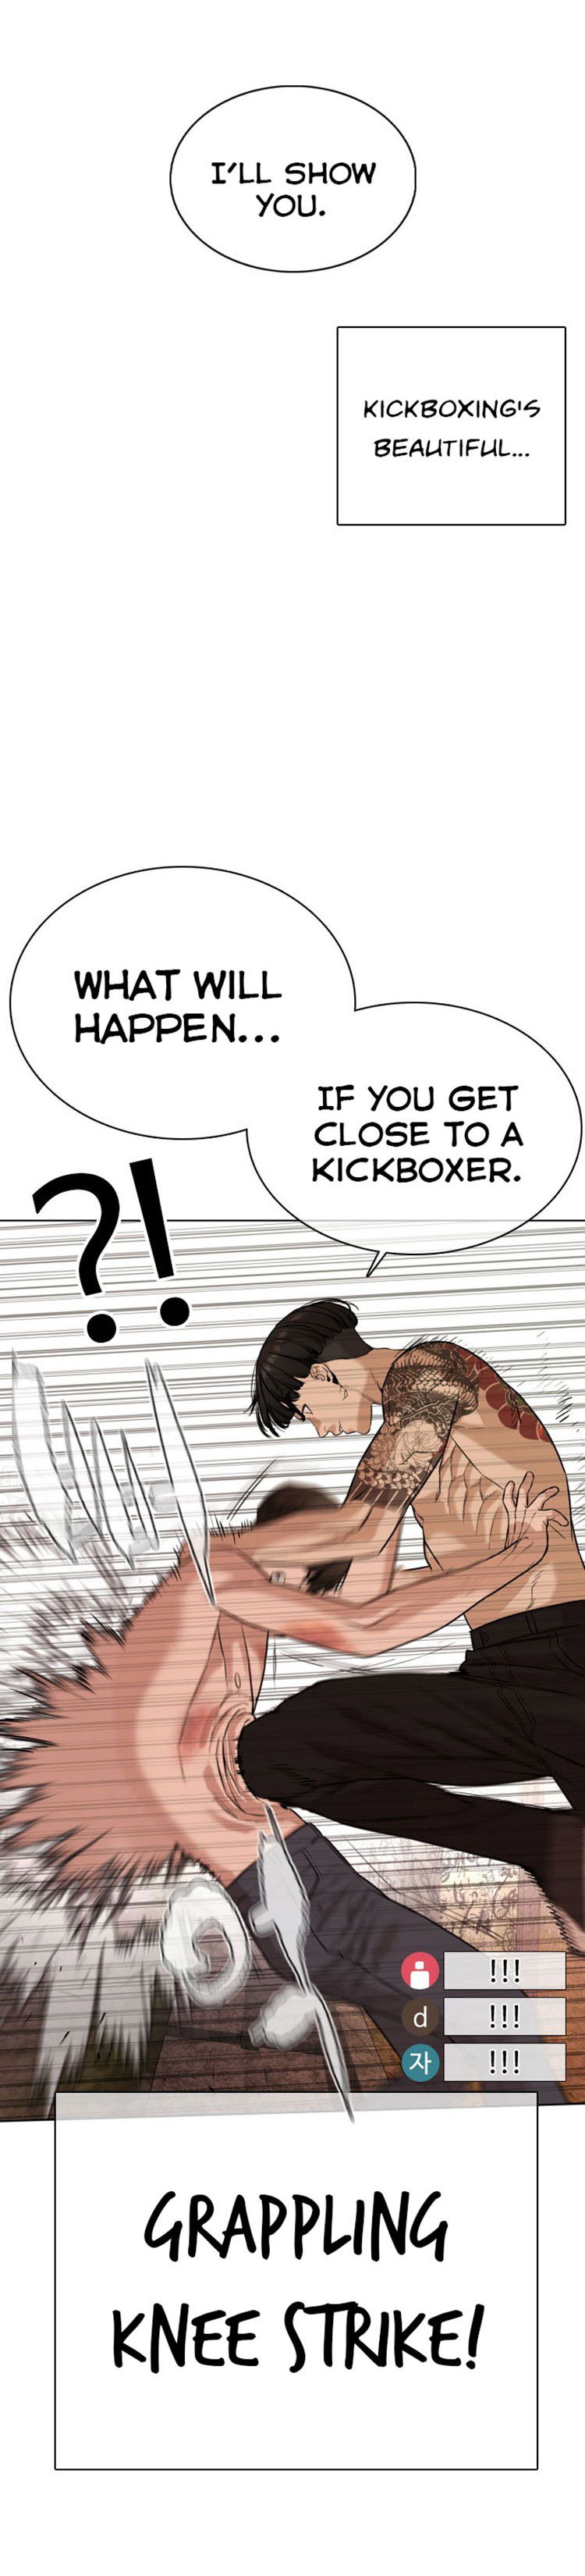 How To Fight Chapter 32  And Win Against Kickboxing page 50